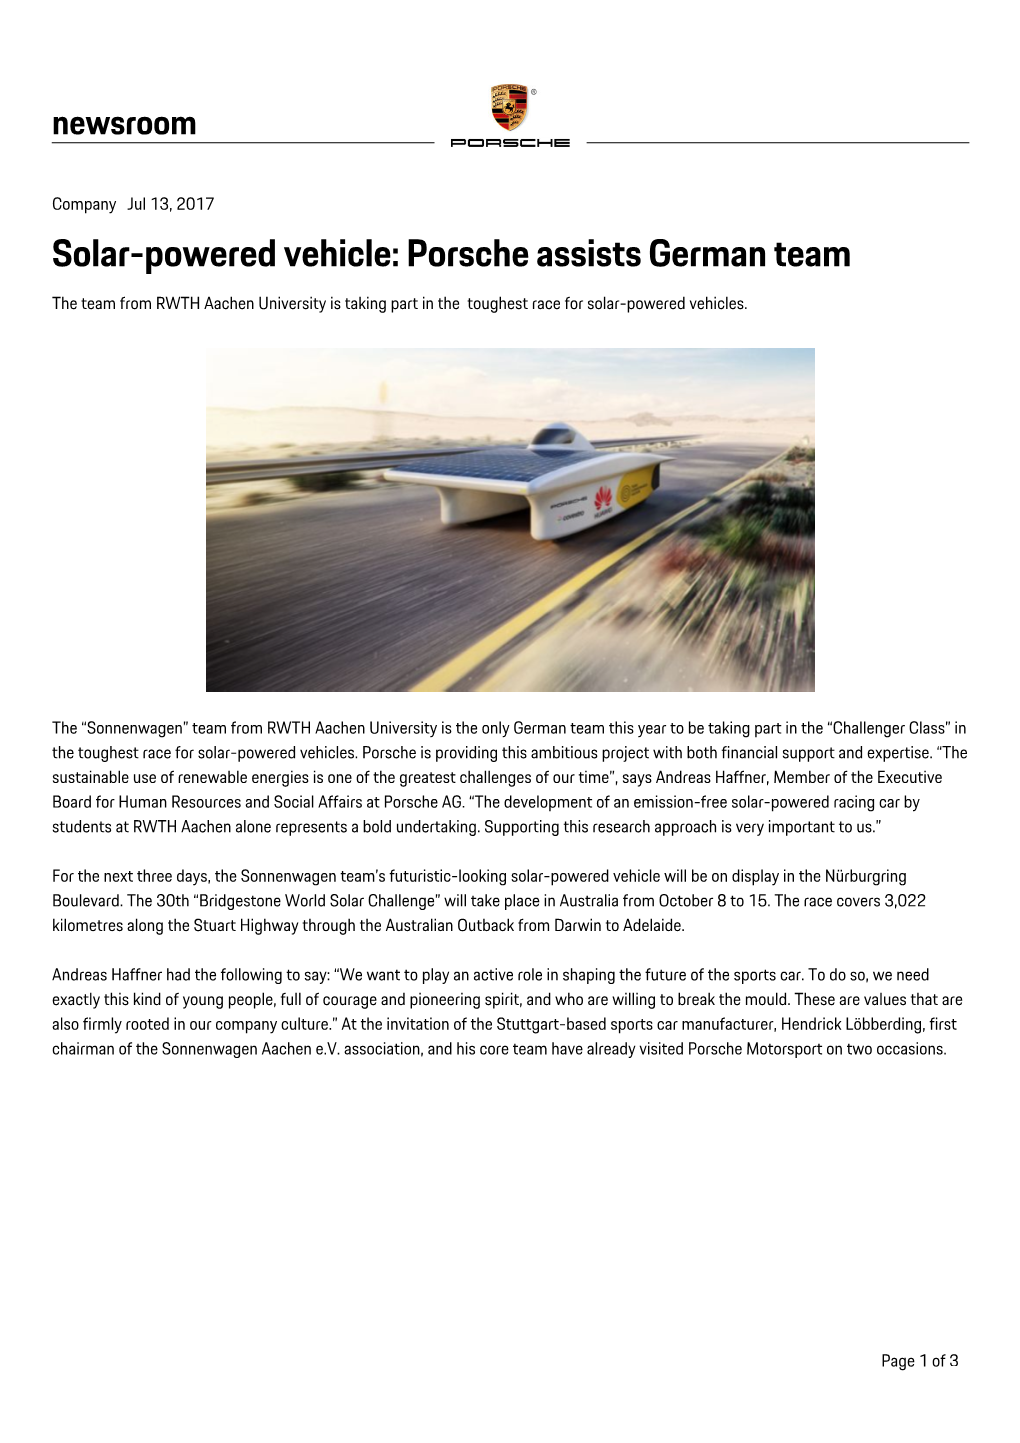 Solar-Powered Vehicle: Porsche Assists German Team the Team from RWTH Aachen University Is Taking Part in the Toughest Race for Solar-Powered Vehicles